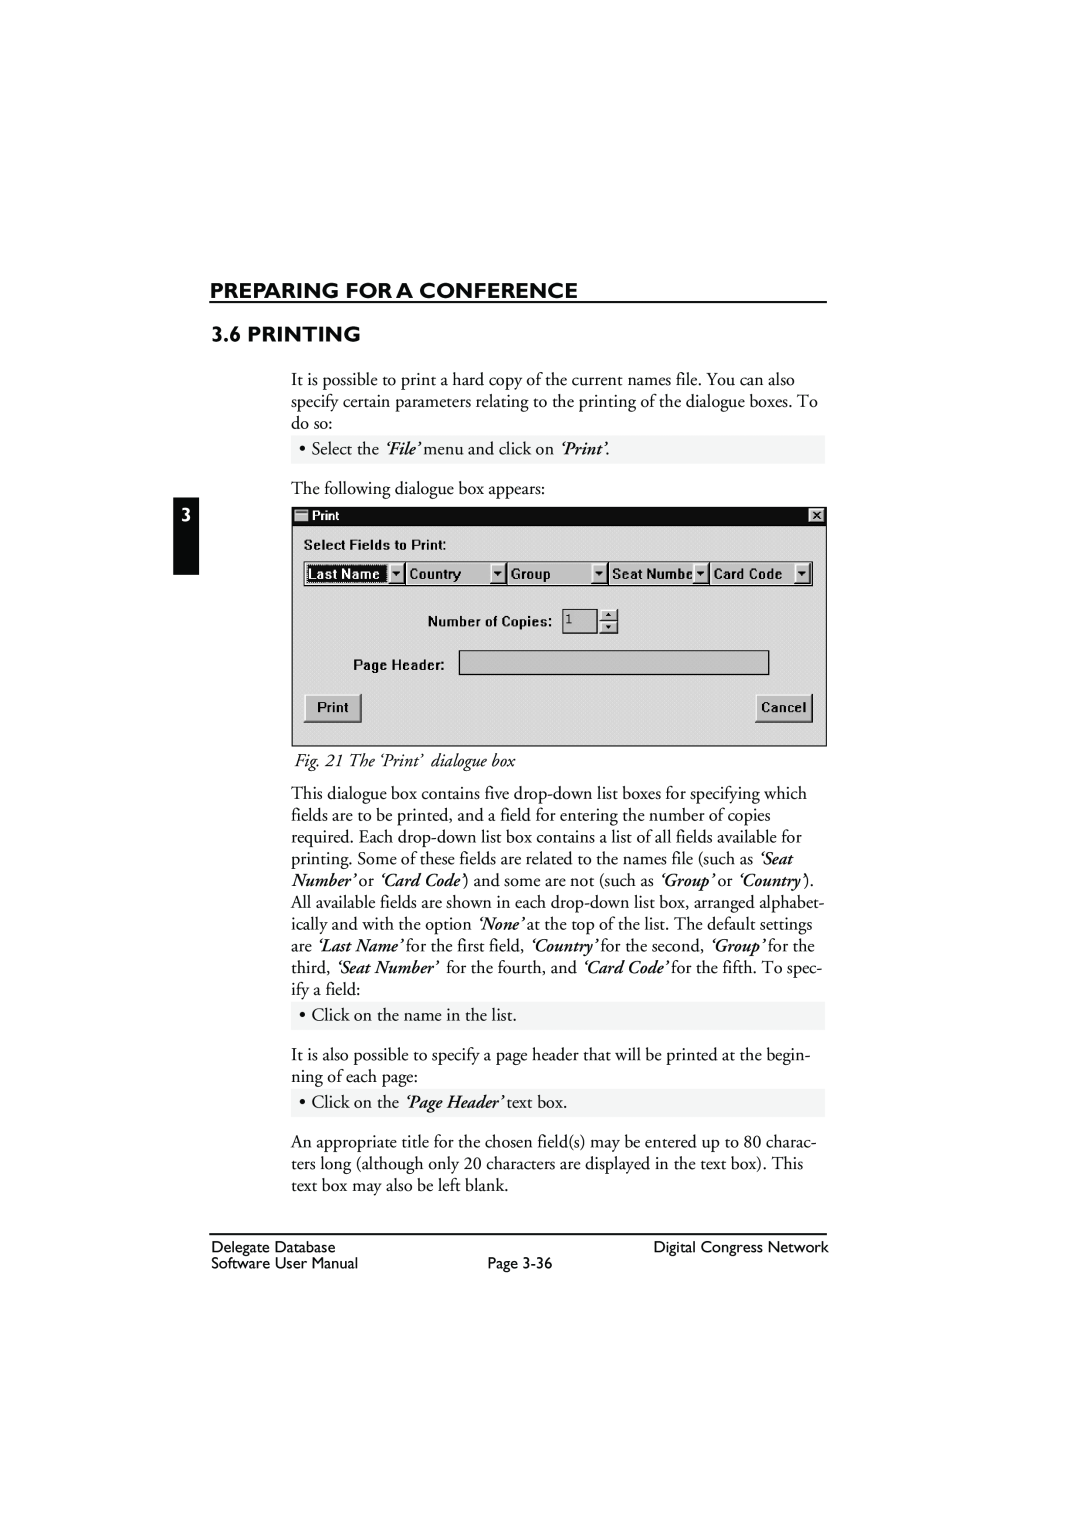 Bosch Appliances LBB3580 user manual PREPARING FOR A CONFERENCE 3.6 PRINTING, The ‘Print’ dialogue box 